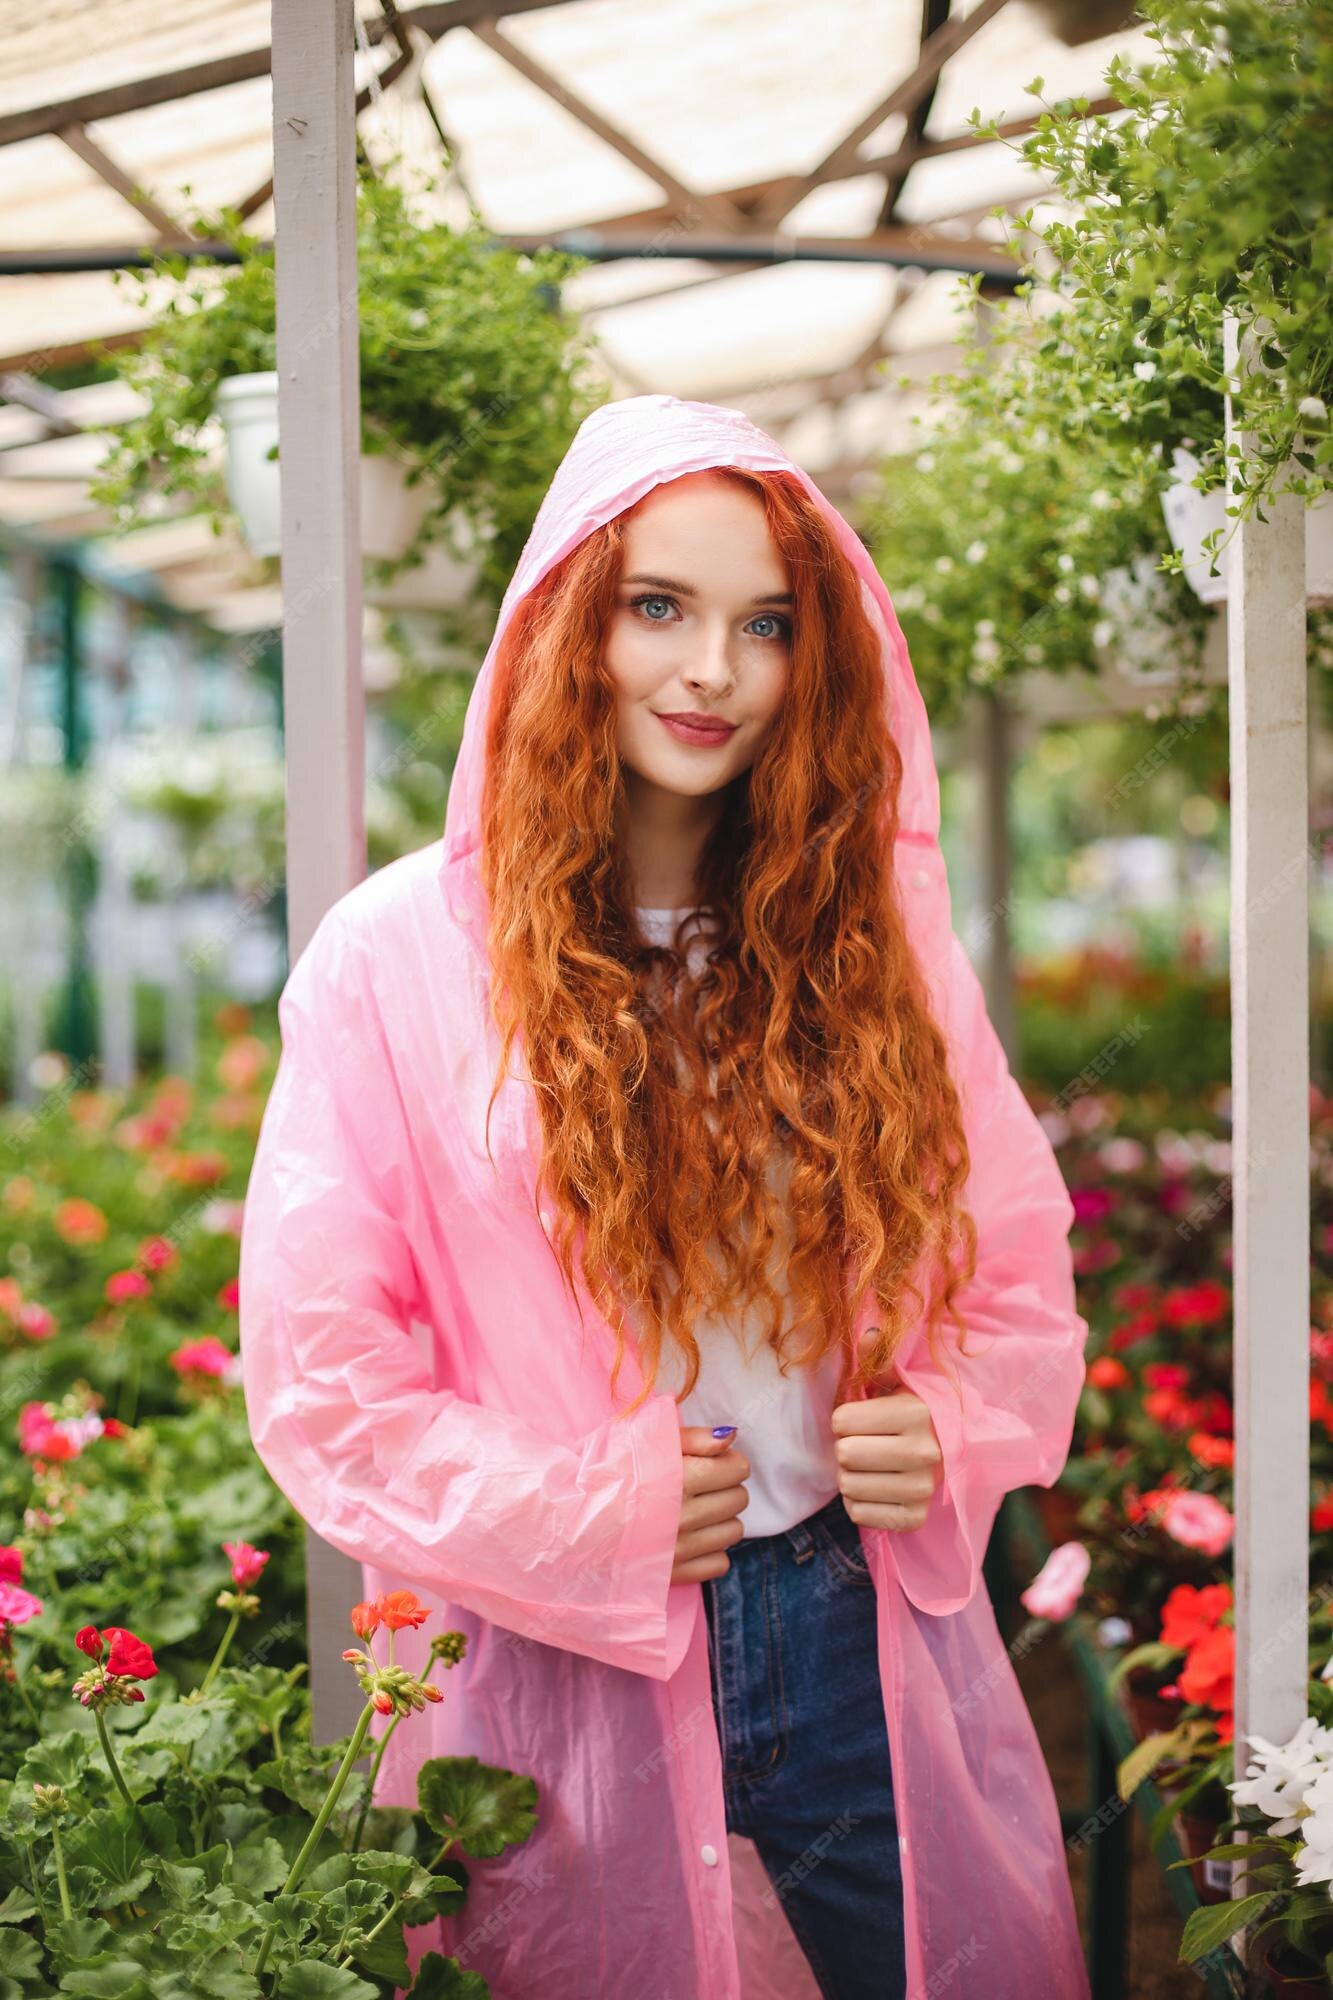 Free Photo Beautiful Lady With Redhead Curly Hair Standing In Pink Raincoat And Dreamily